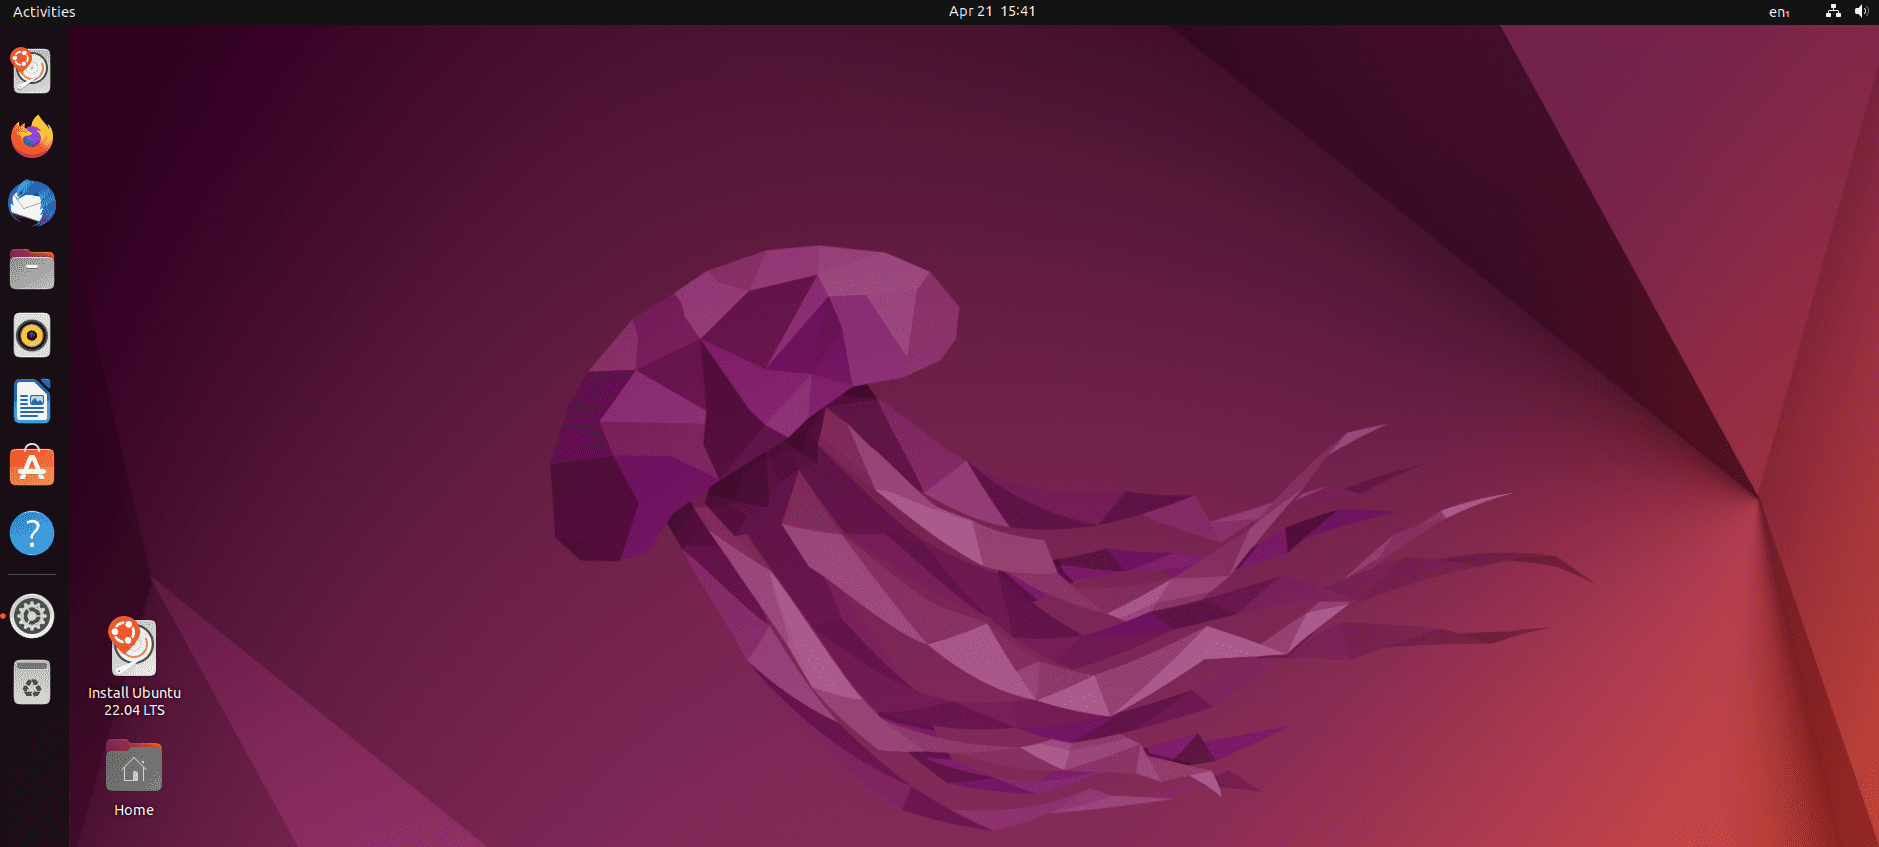 Ubuntu 22.04 LTS with GNOME 42 and Wayland as the default is now available